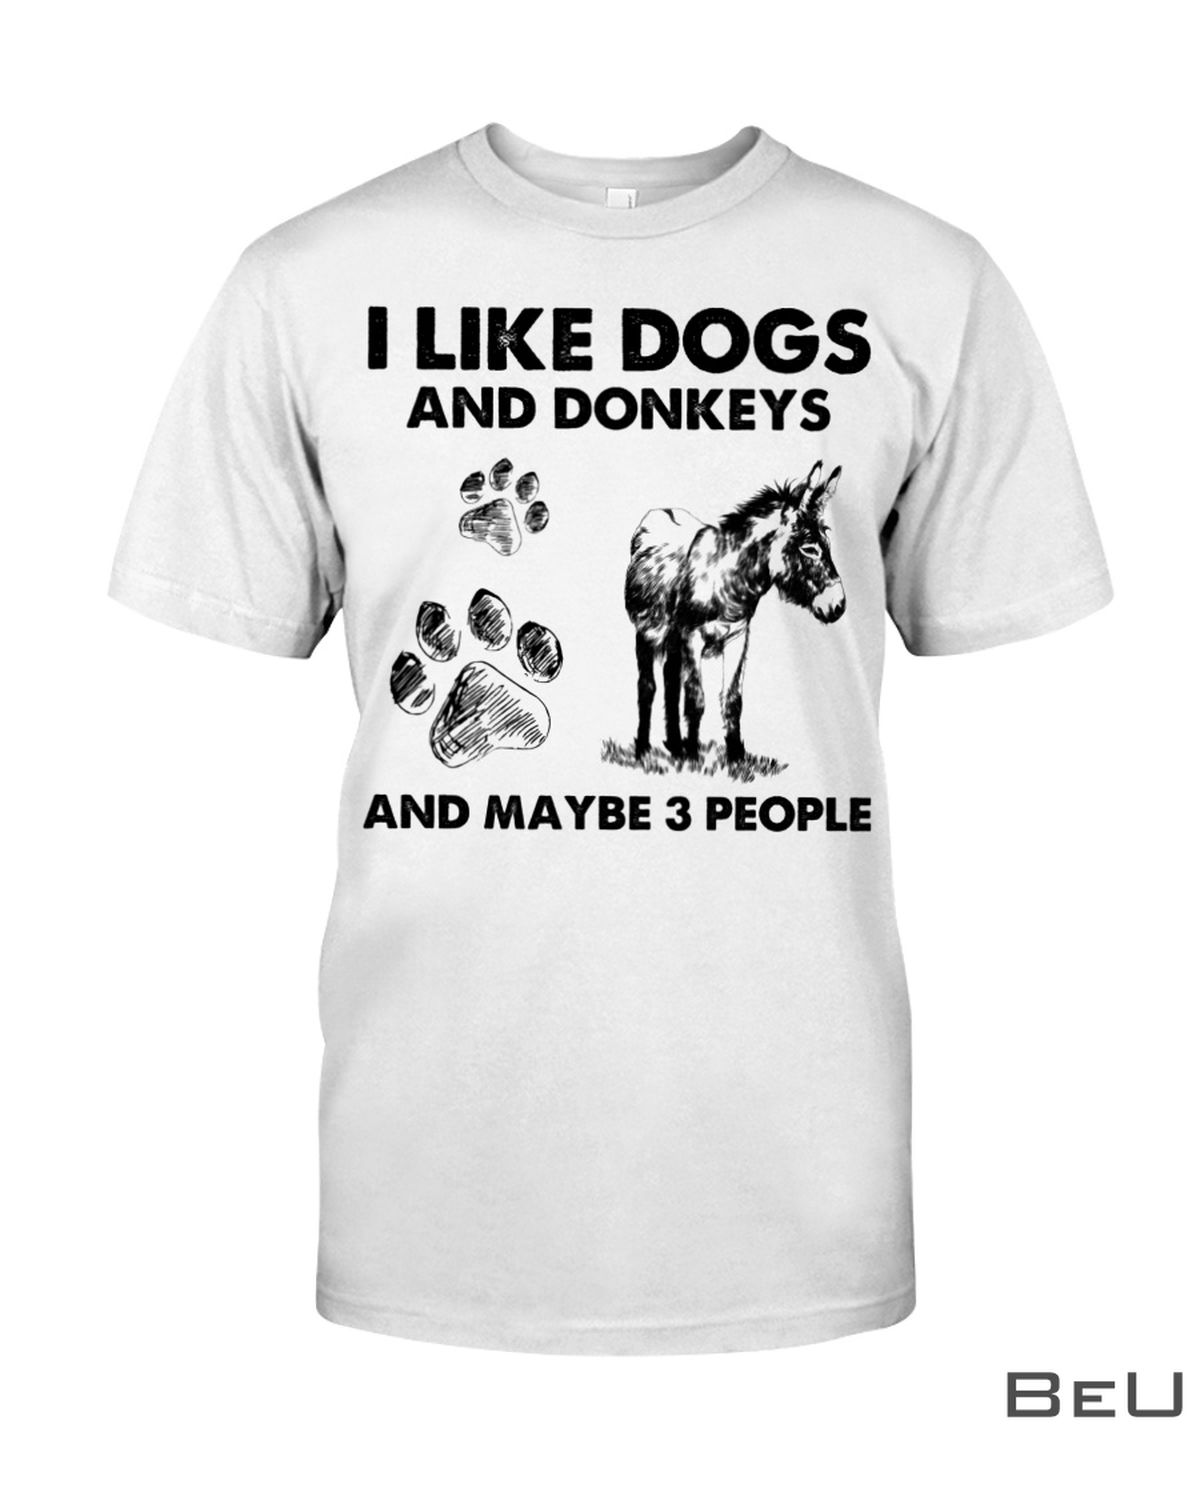 I-Like-Dogs-And-Donkeys-And-Maybe-3-People-Shirt